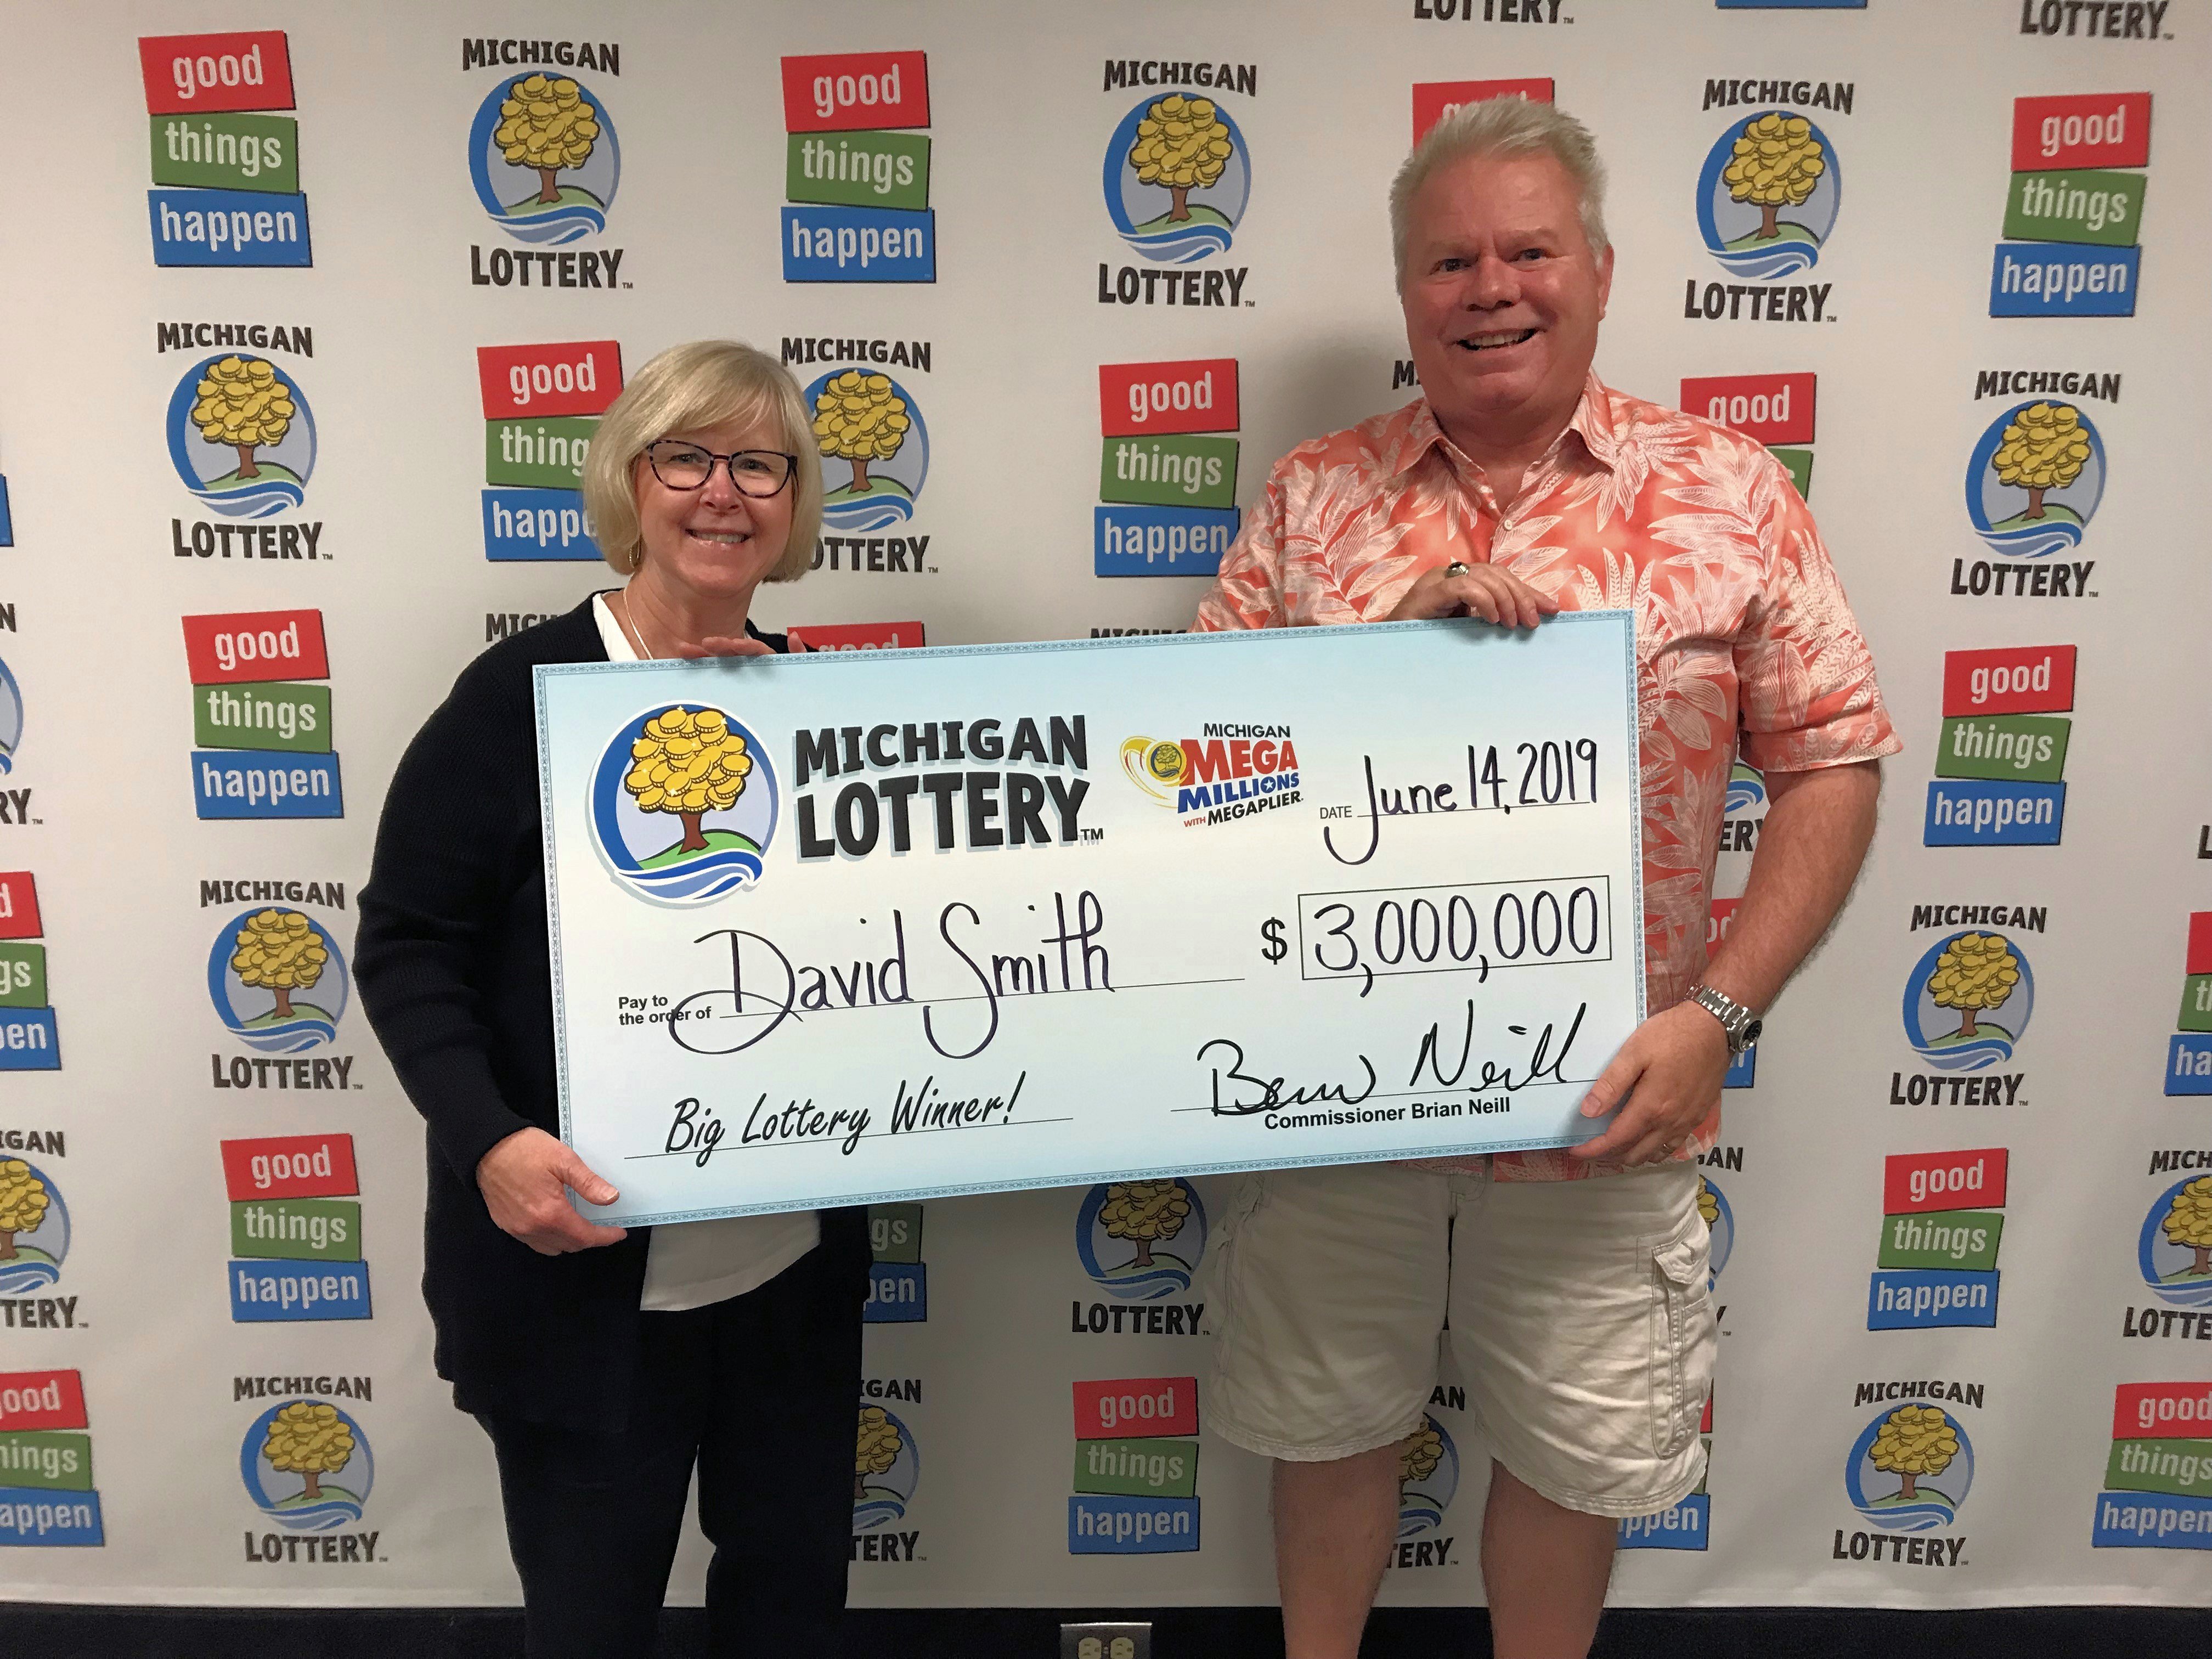 Celebrity Lottery Players: Who's Been Lucky at Go Lotter?